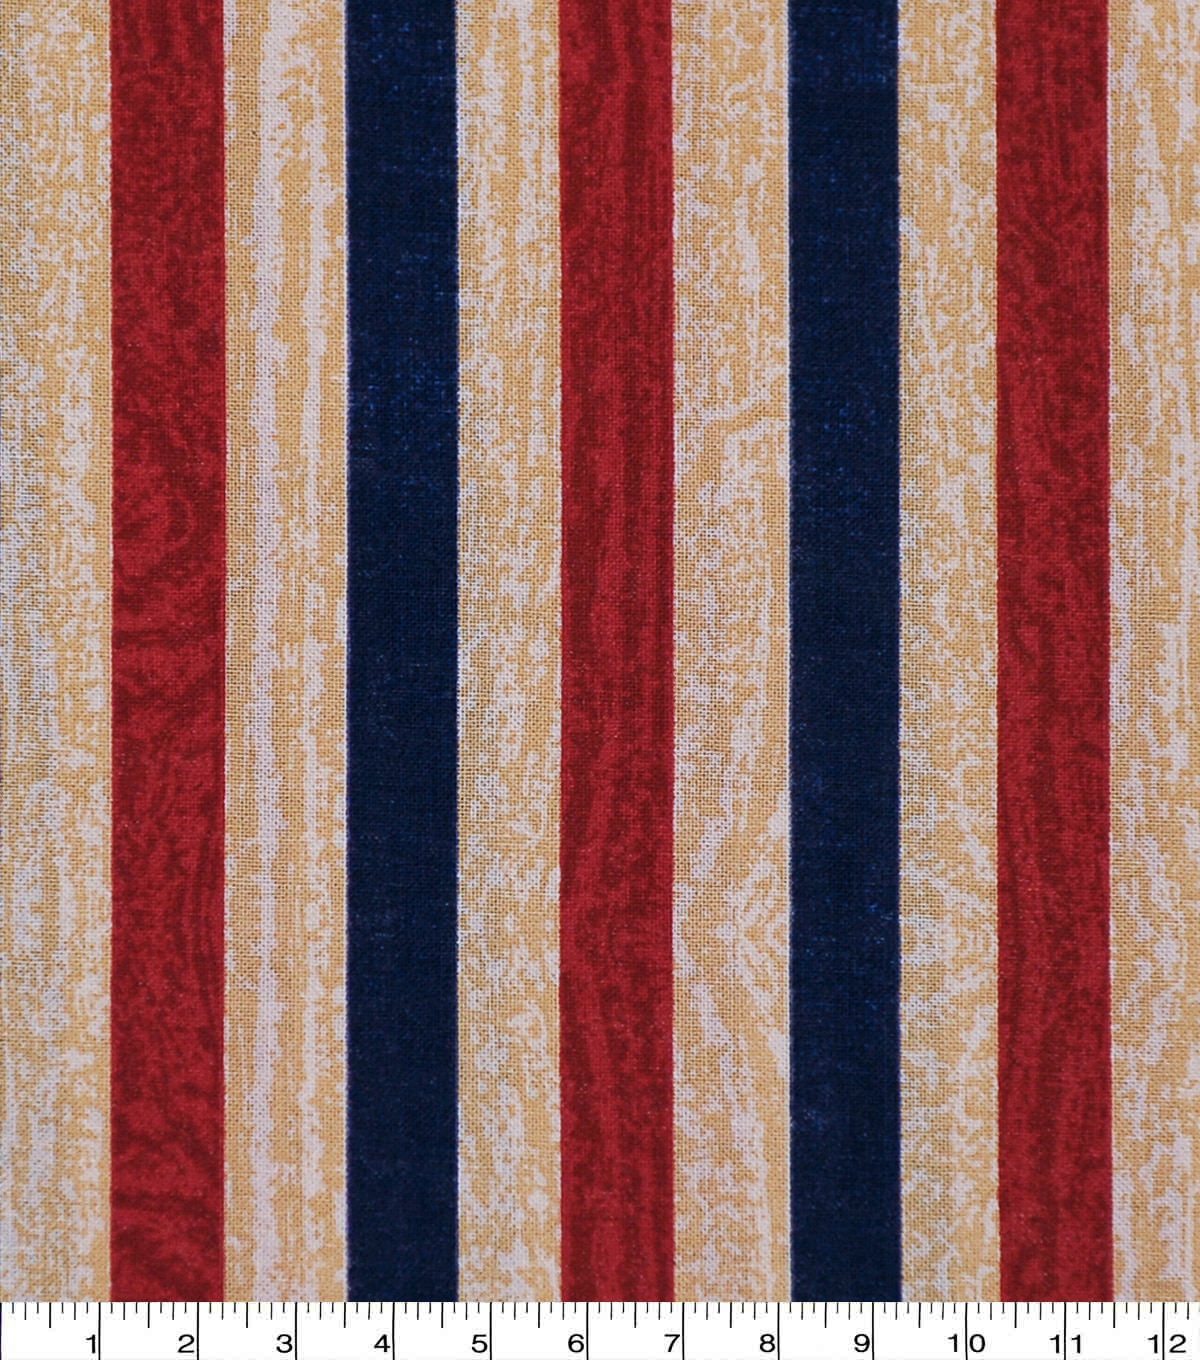 Top 99+ Images Red White And Blue Stripes Background Full HD, 2k, 4k